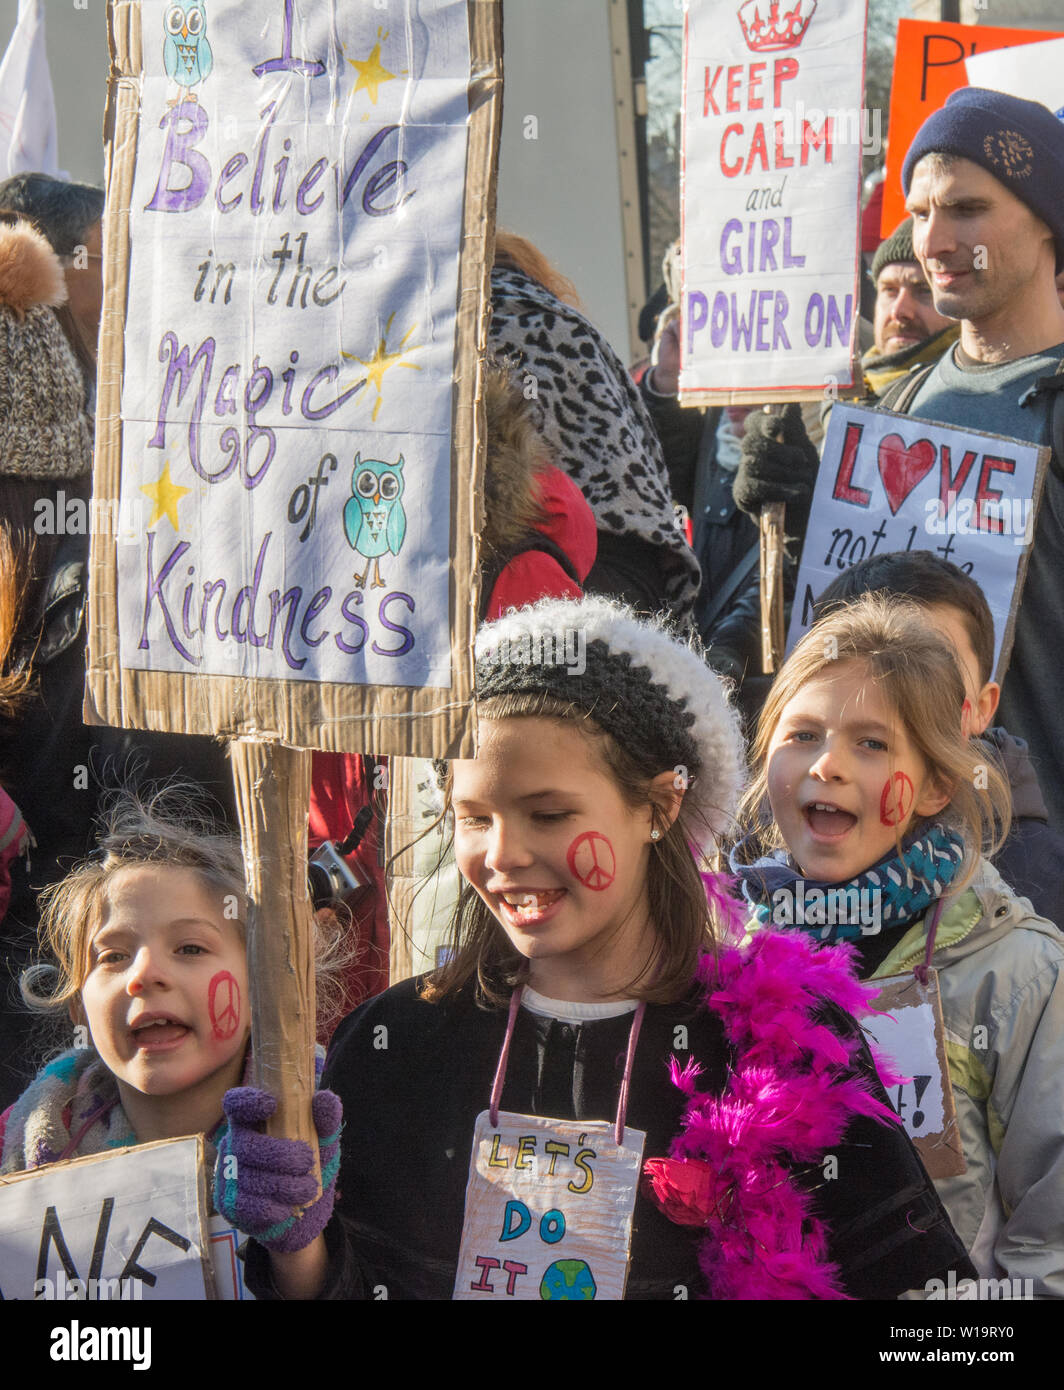 Women's March, London, UK, 21st January 2017. A young girl holds a placard with the message 'I believe in the magic of kindness' as women, men and children take to the streets in London to protest the day after the inauguration of President Donald Trump. Up to 10,000 took part in the London women's march as people worldwide marked the day by marching in an act of international solidarity. Stock Photo